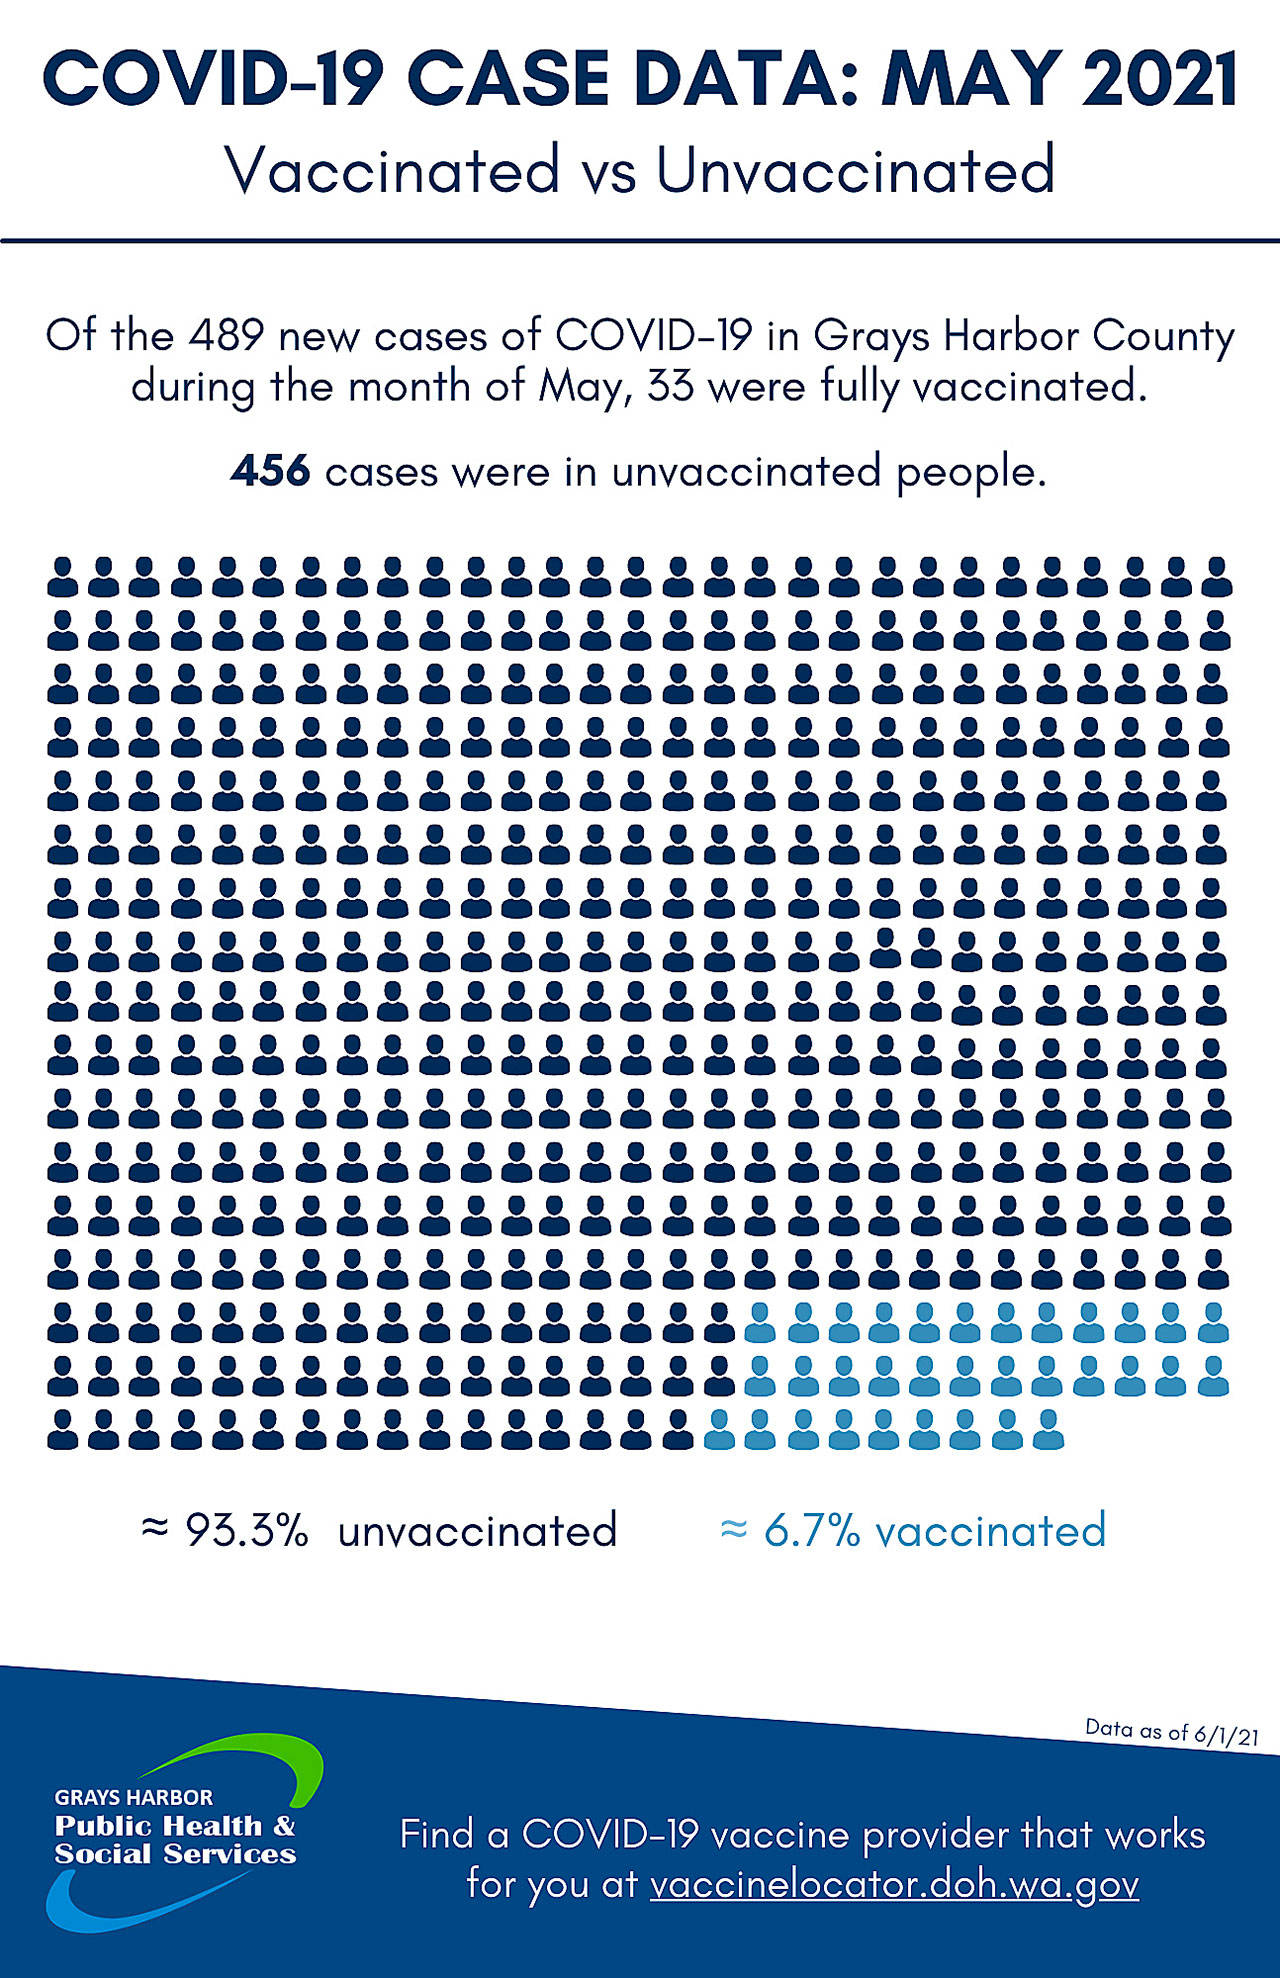 Grays Harbor County Public Health says the small number of “breakthrough cases,” positive COVID-19 tests in fully vaccinated individuals, proves the vaccine is effective. (Courtesy Grays Harbor County Public Health)